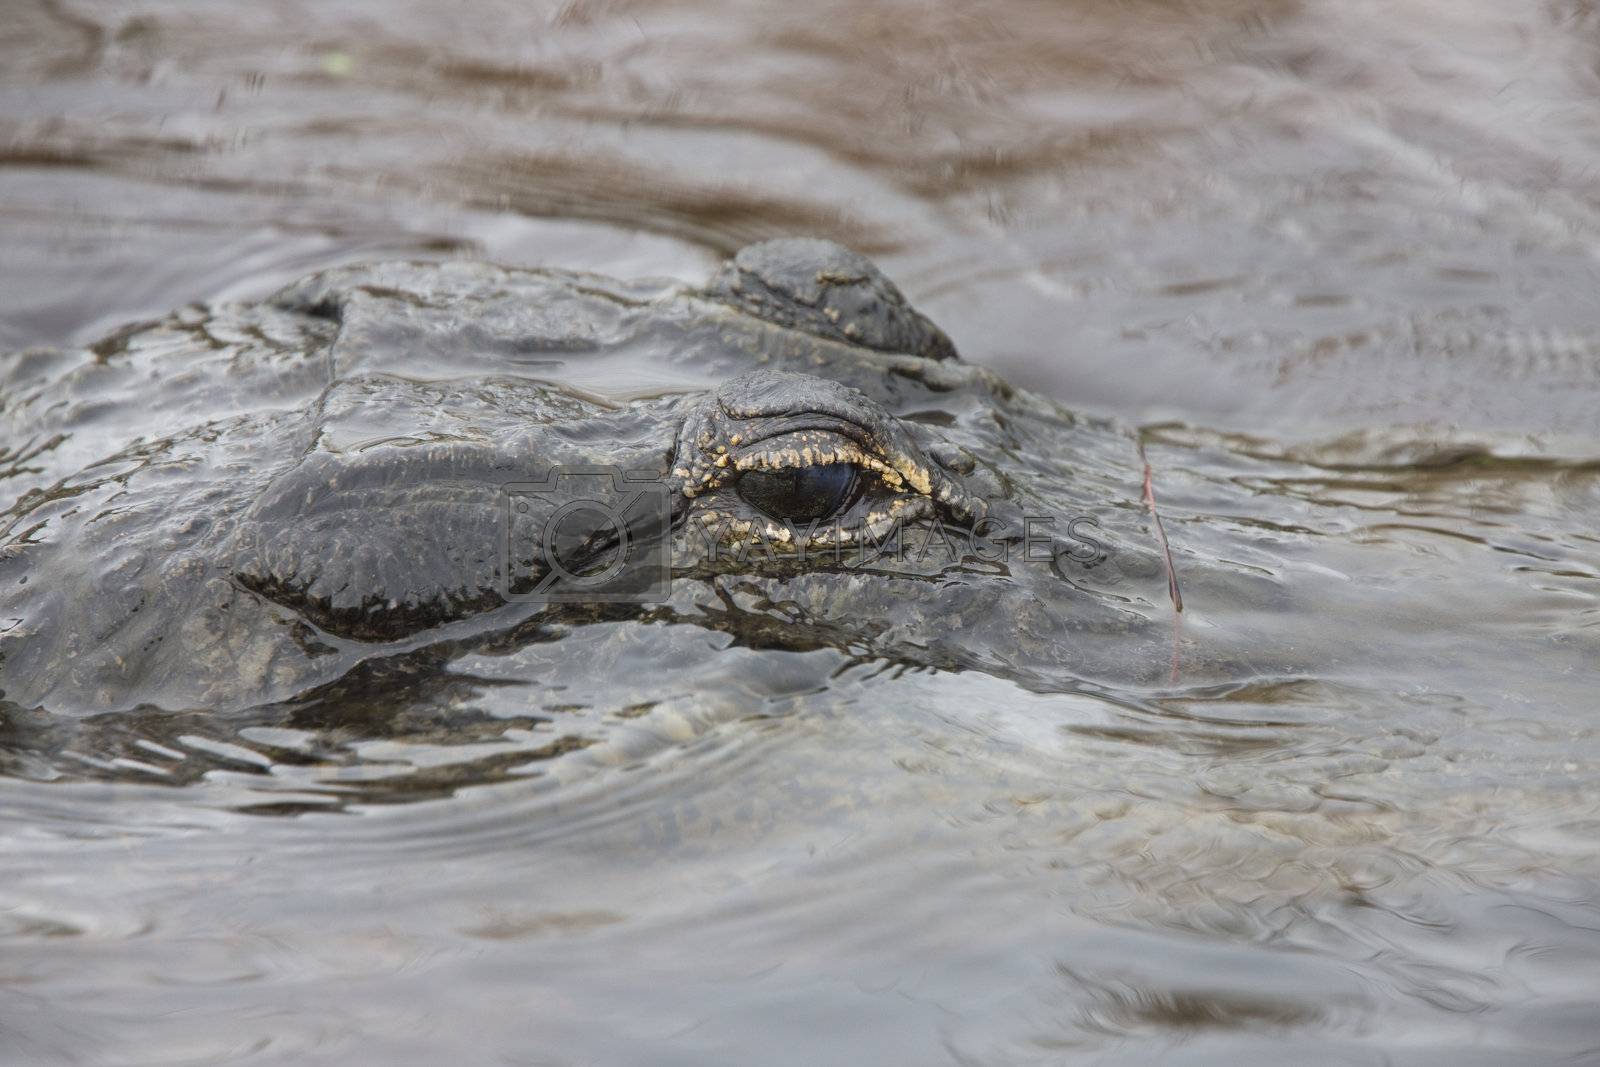 Royalty free image of American Alligator in Florida waters by pictureguy